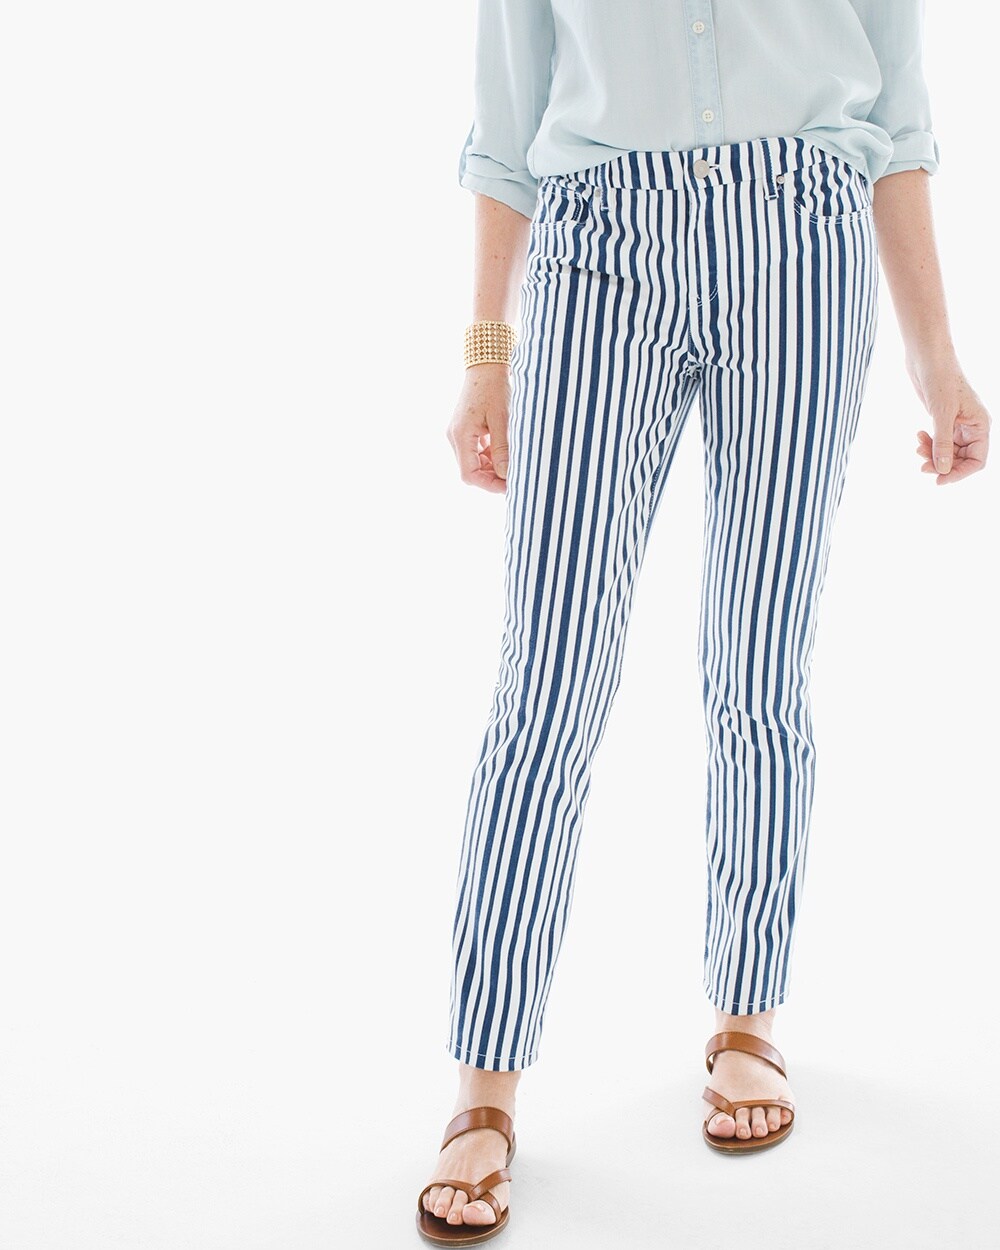 So Slimming Striped Girlfriend Ankle Jeans